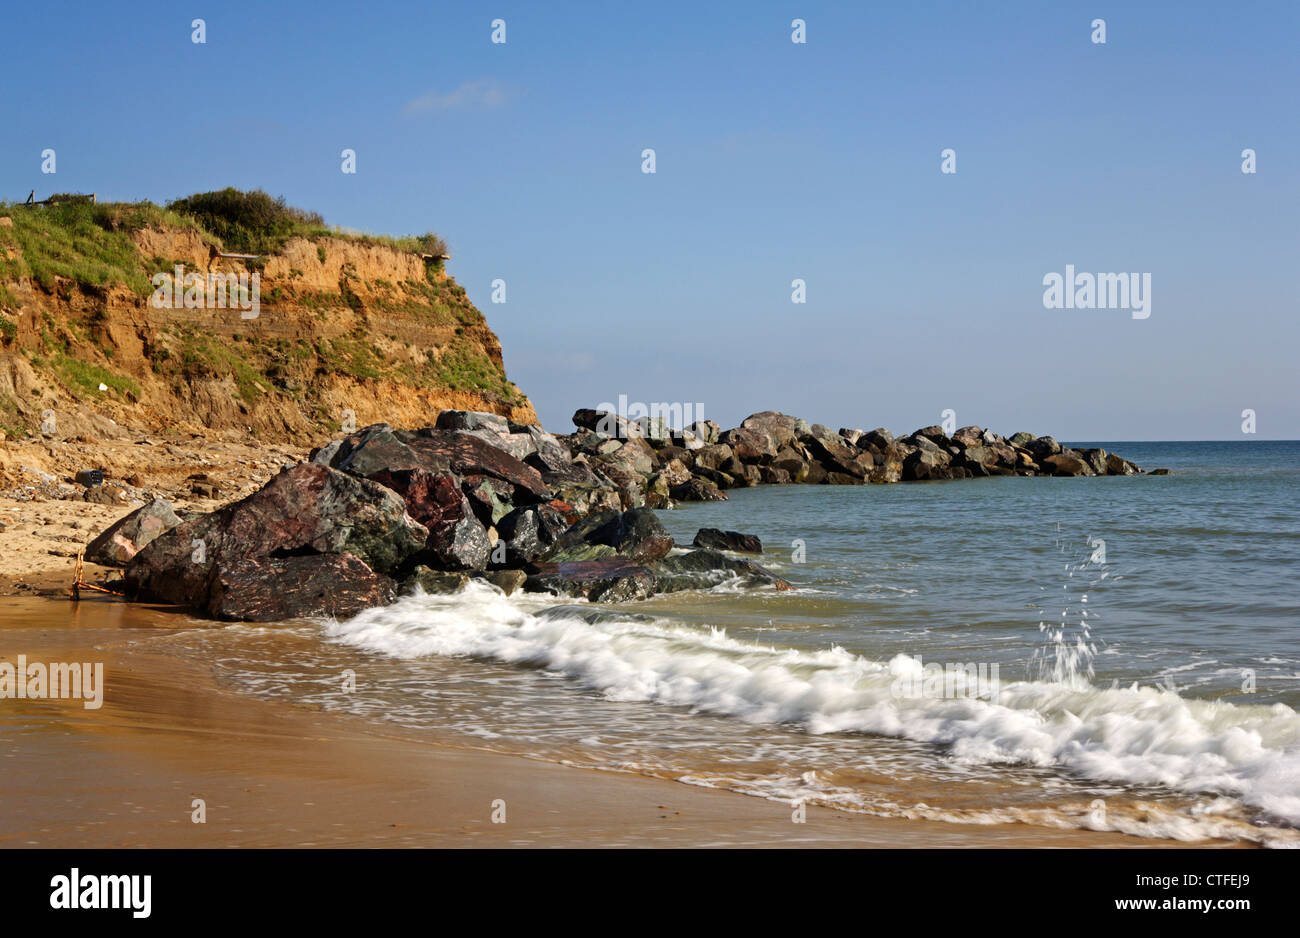 Rock armour sea defences at the east end of Happisburgh, Norfolk, England, United Kingdom. Stock Photo